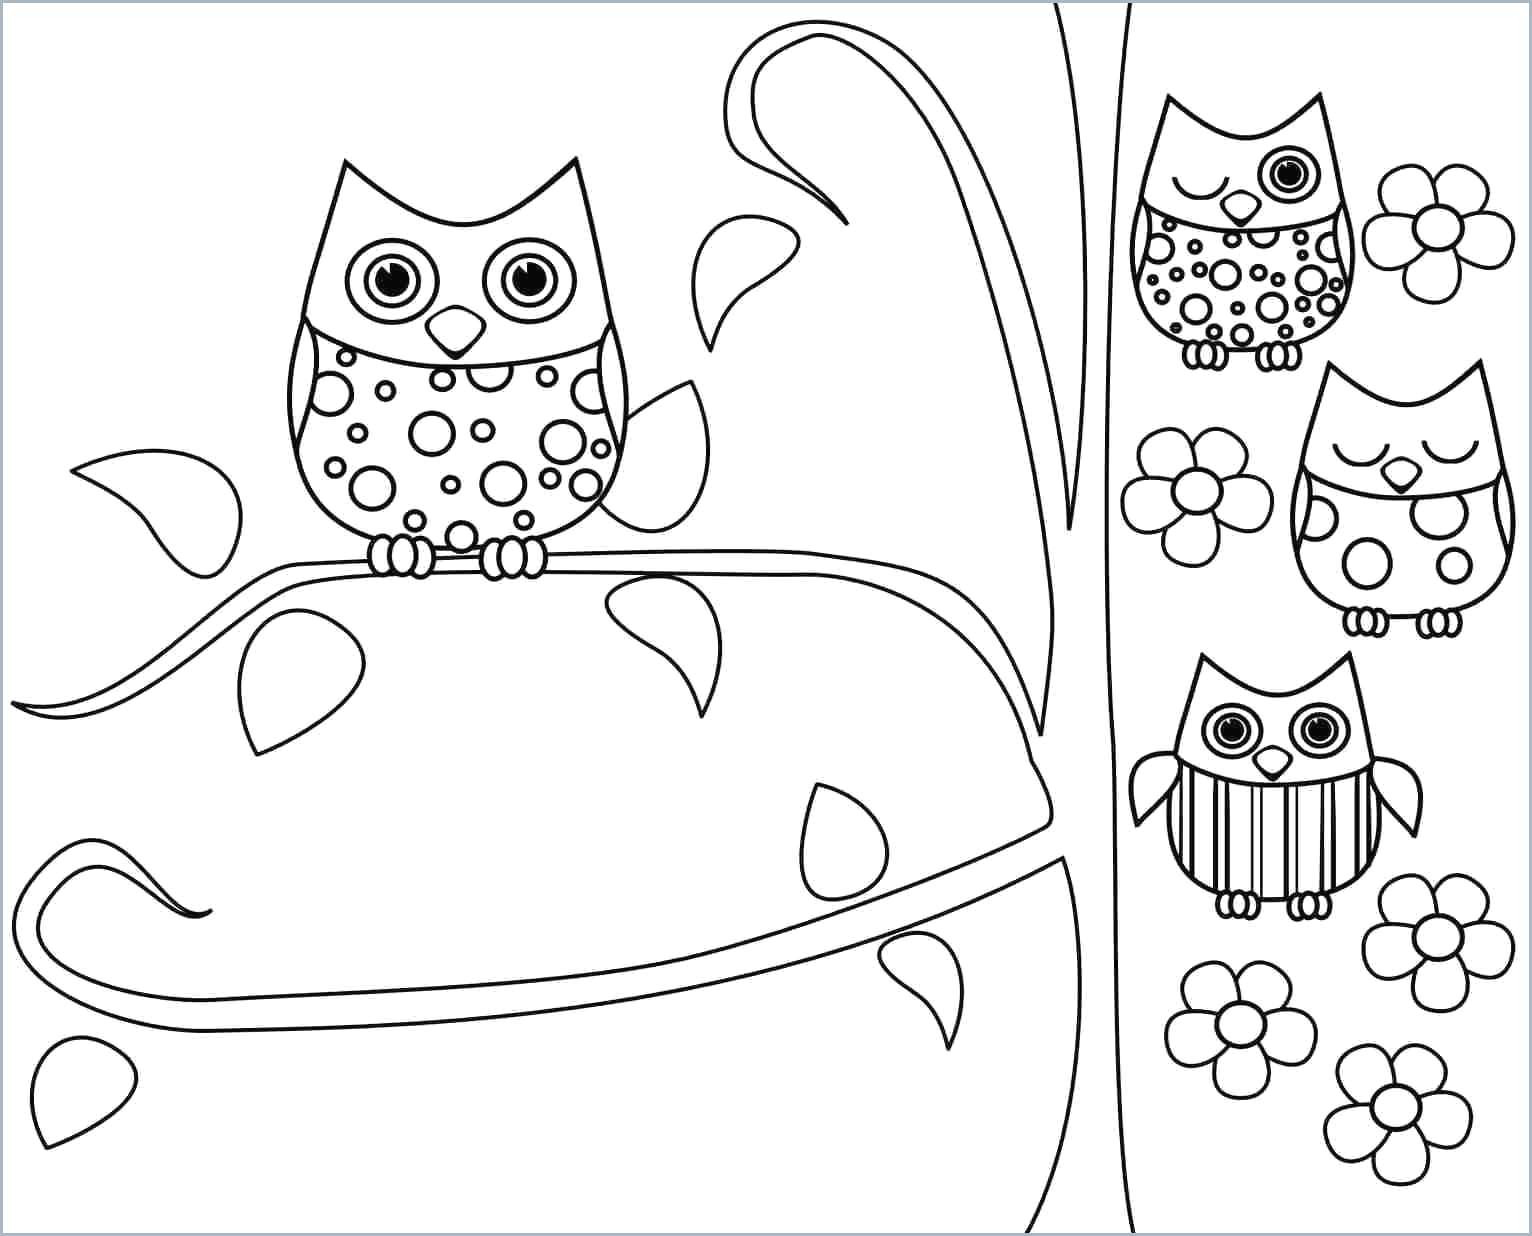 Drawing Ghost Eyes Bat Coloring Pages New Coloring Pages Simple Ghost Drawing 24